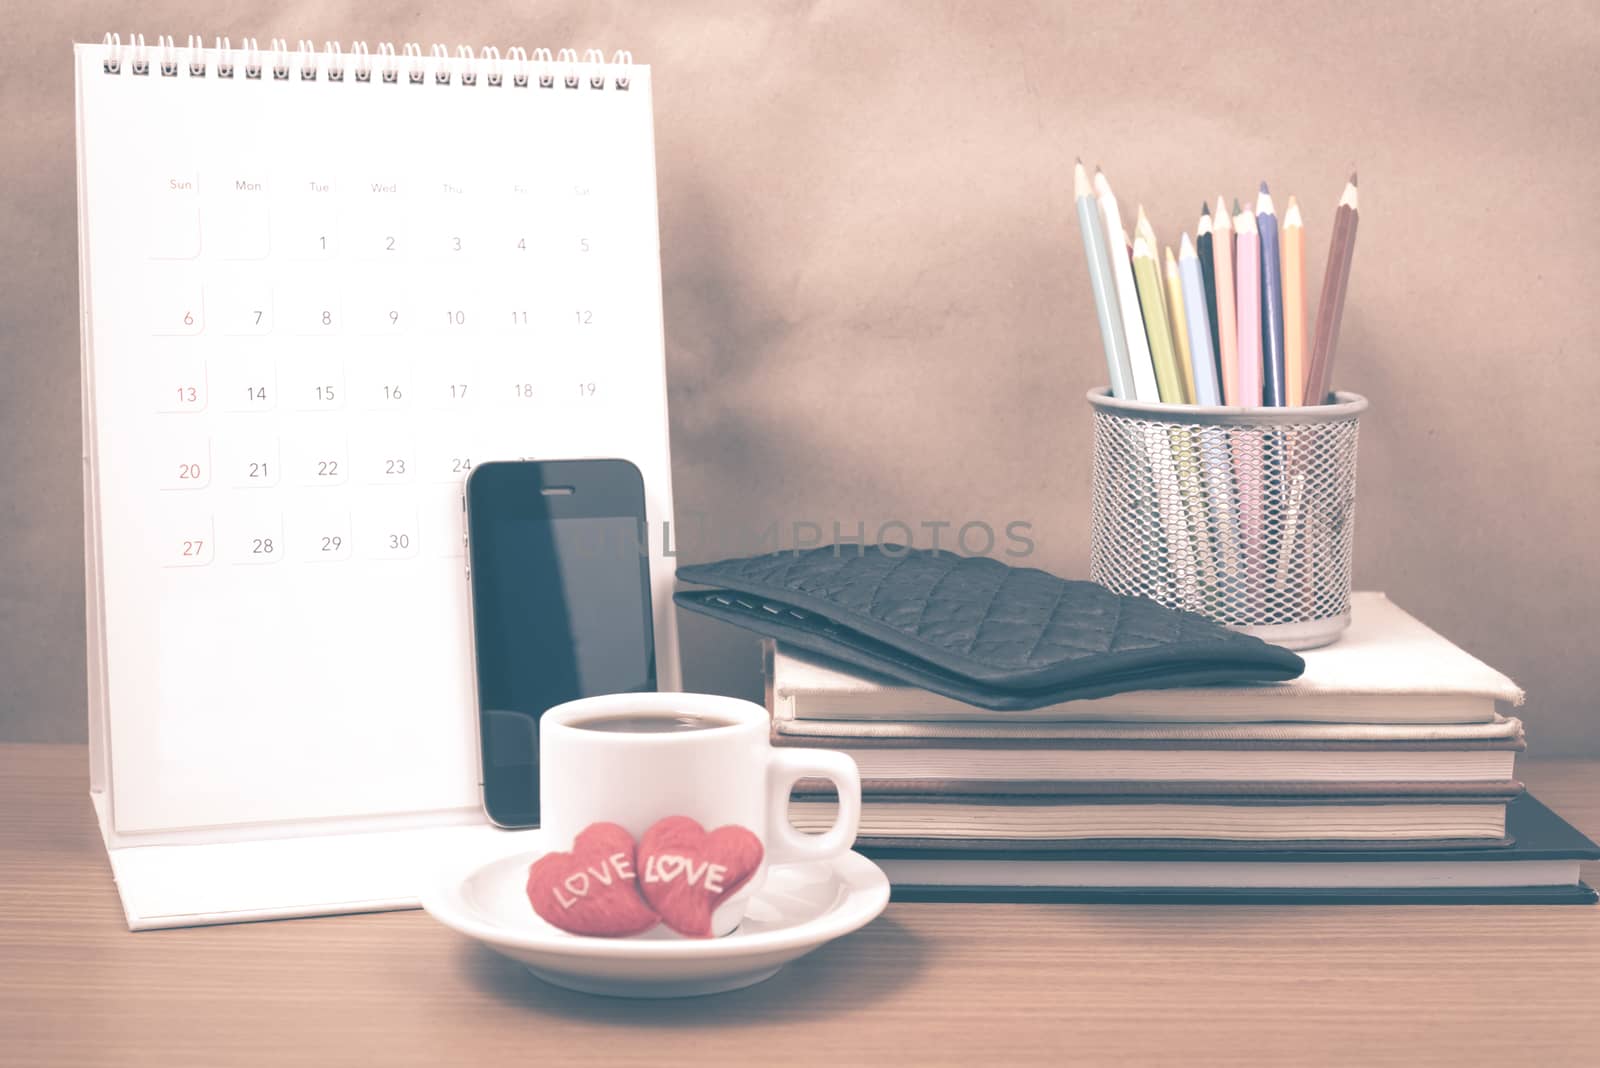 office desk : coffee with phone,wallet,calendar,heart,color pencil box,stack of book,heart on wood background vintage style